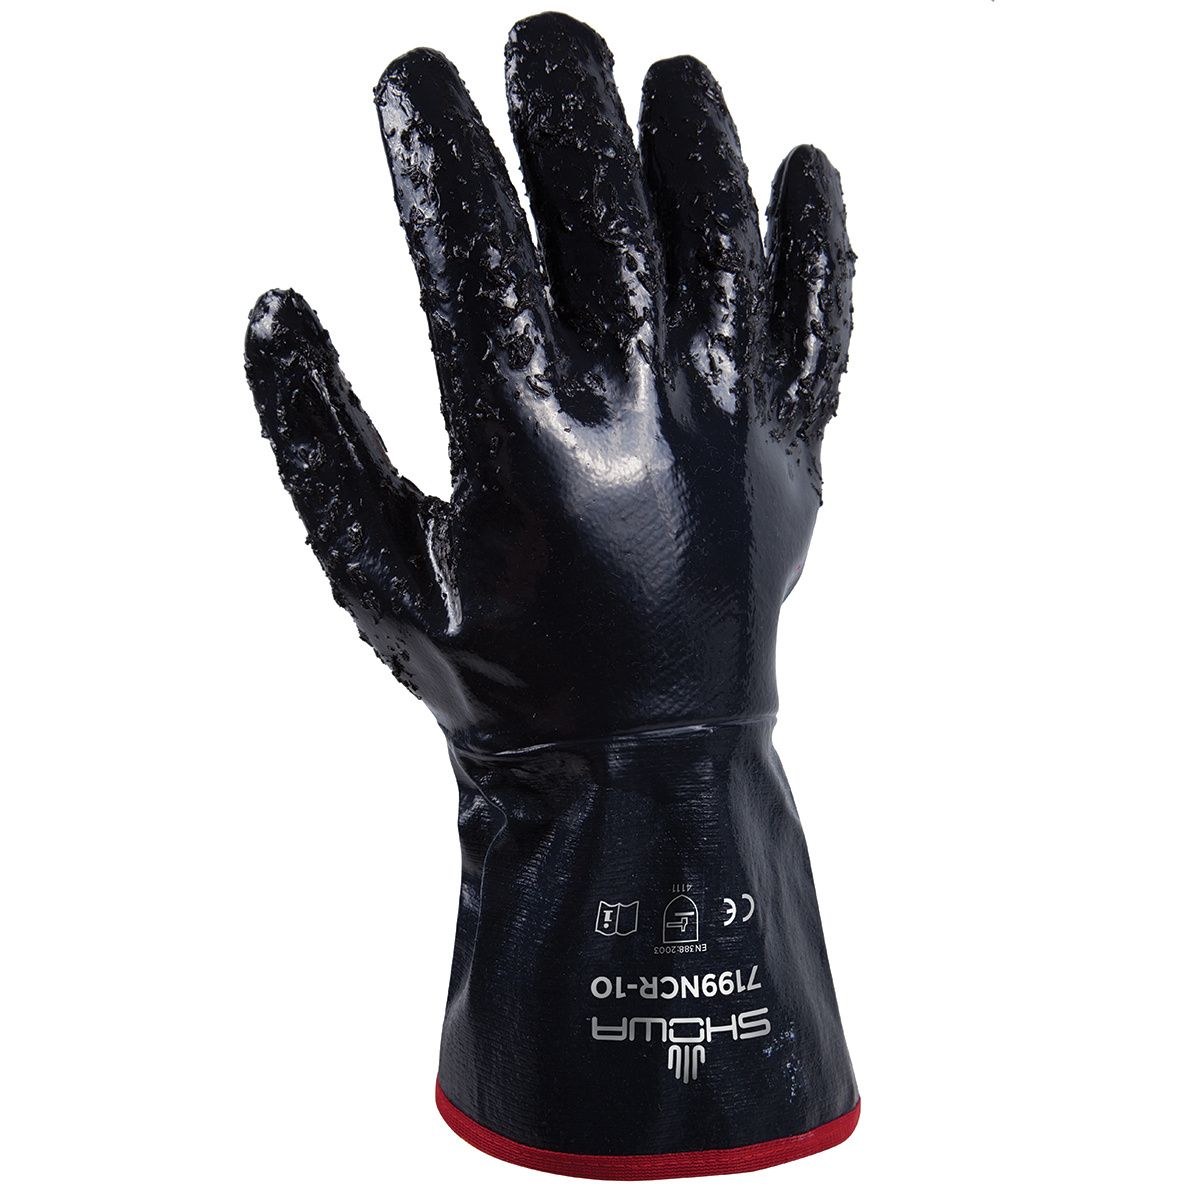 General purpose nitrile-coated, navy, fully coated with sewn-on 5